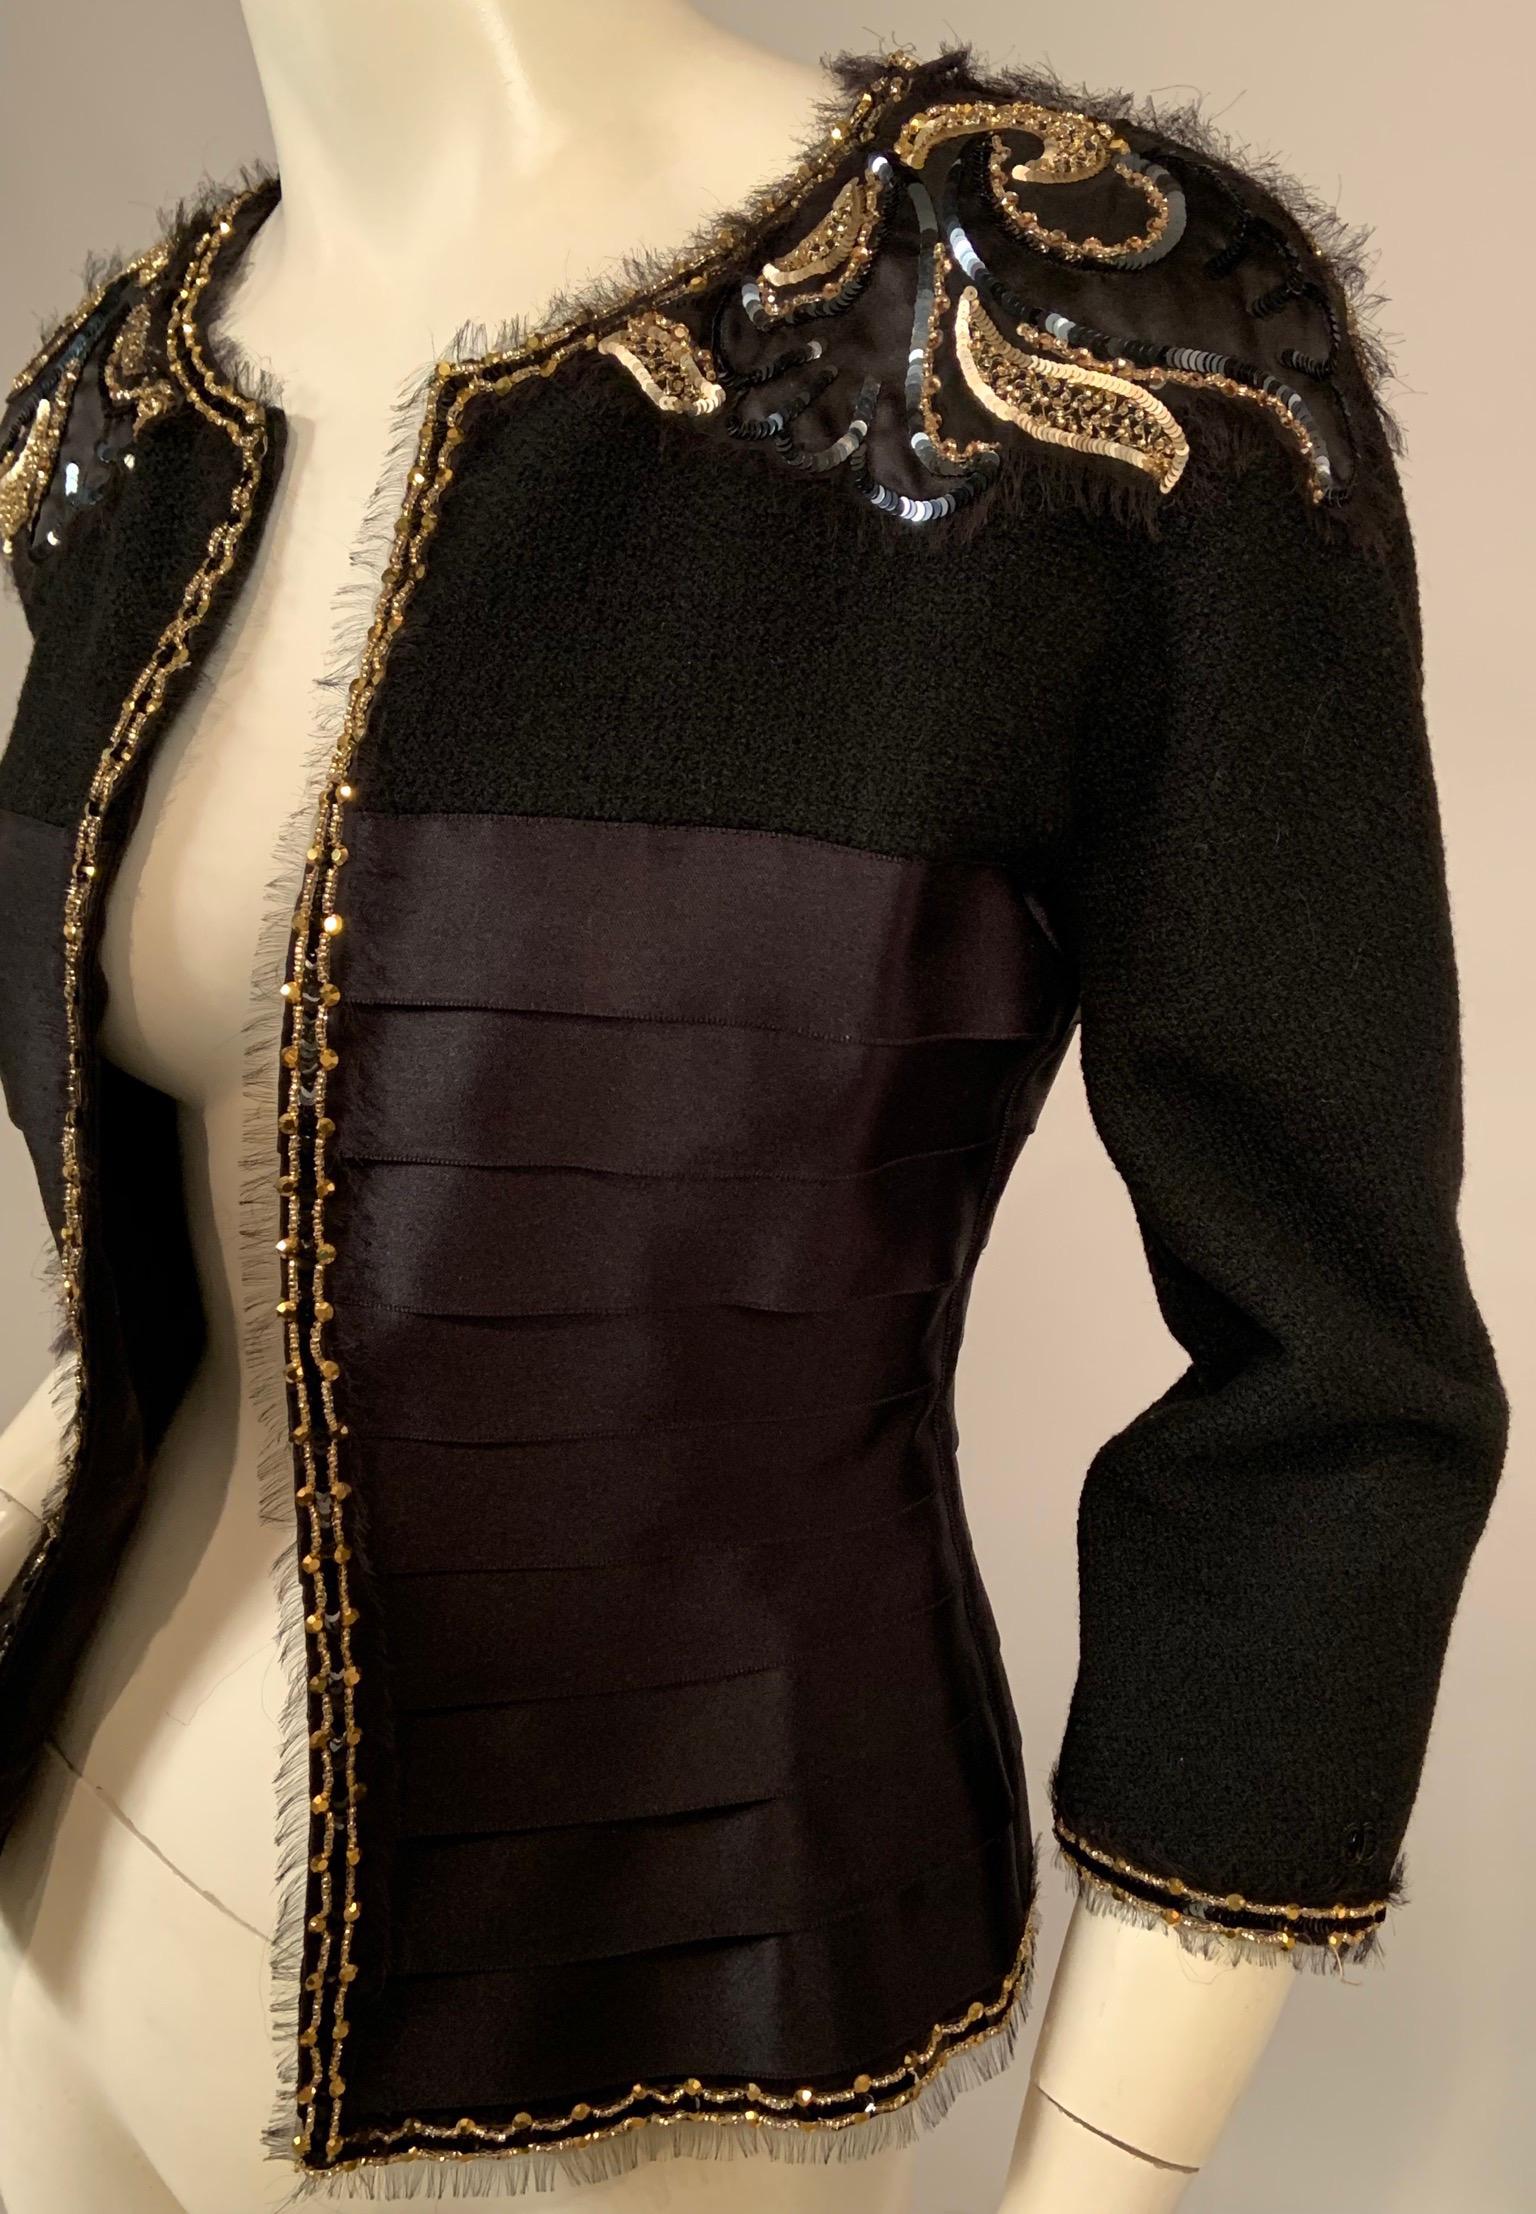 This is a jewel of a Chanel jacket, gorgeous over an evening gown and very chic with black pants or skirt. The jacket has a black wool boucle yoke and sleeves. The shoulders are appliqued with black satin that is embellished with black and gold